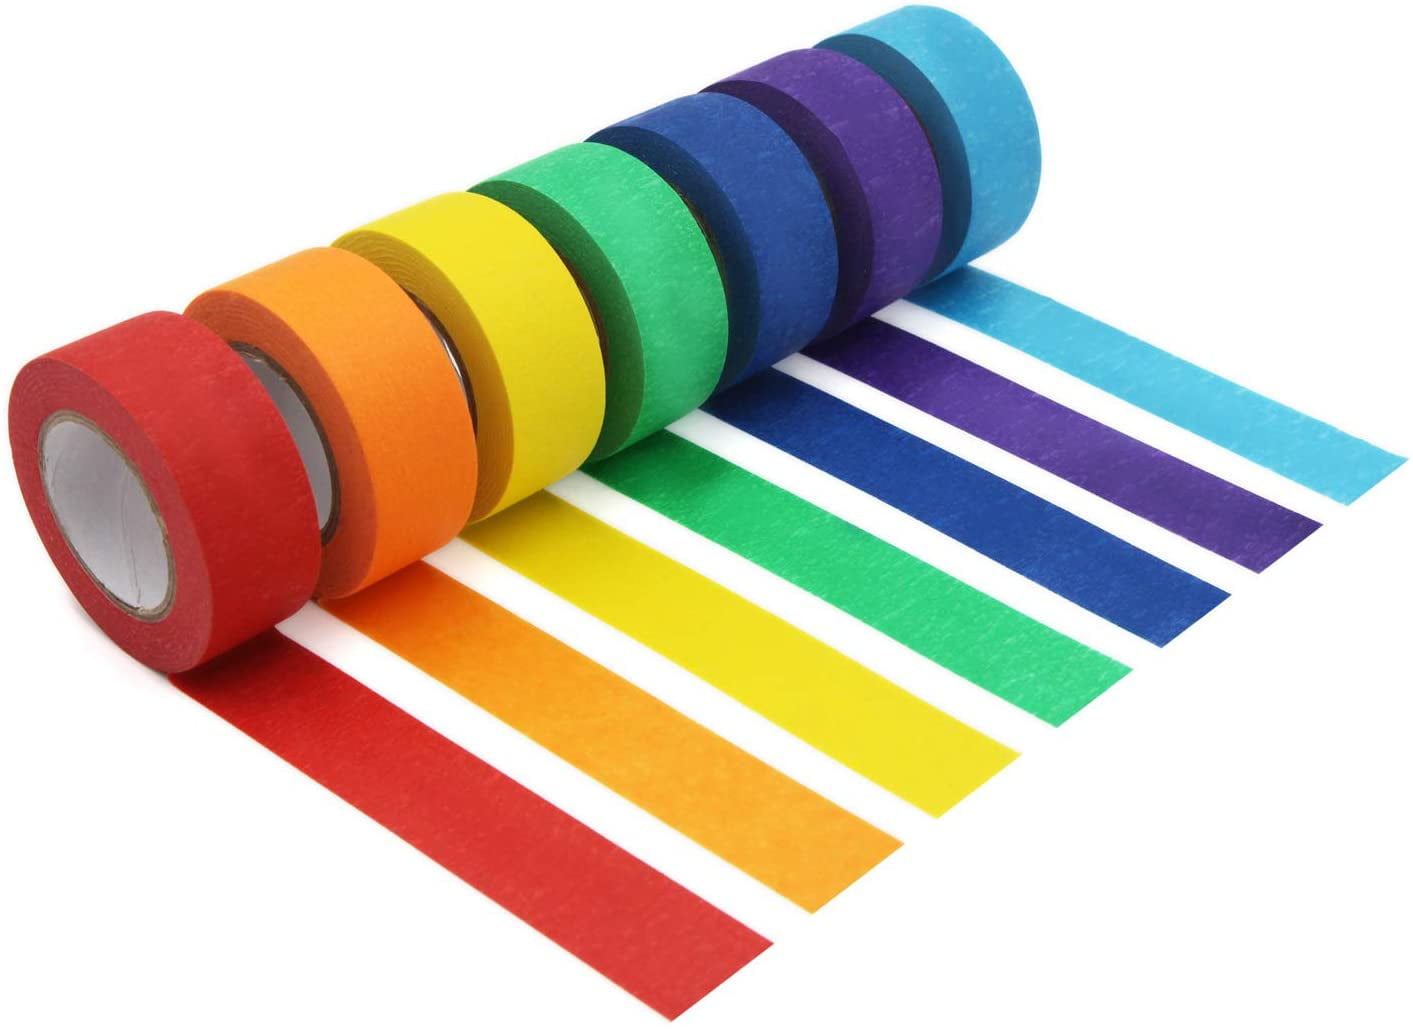 NOGIS 7 Rolls Colored Tape Rainbow Tape Writable Masking Tape Set with 7  Assorted Colors for Craft, DIY, Color Coded, 1 Inch x 16 Yards